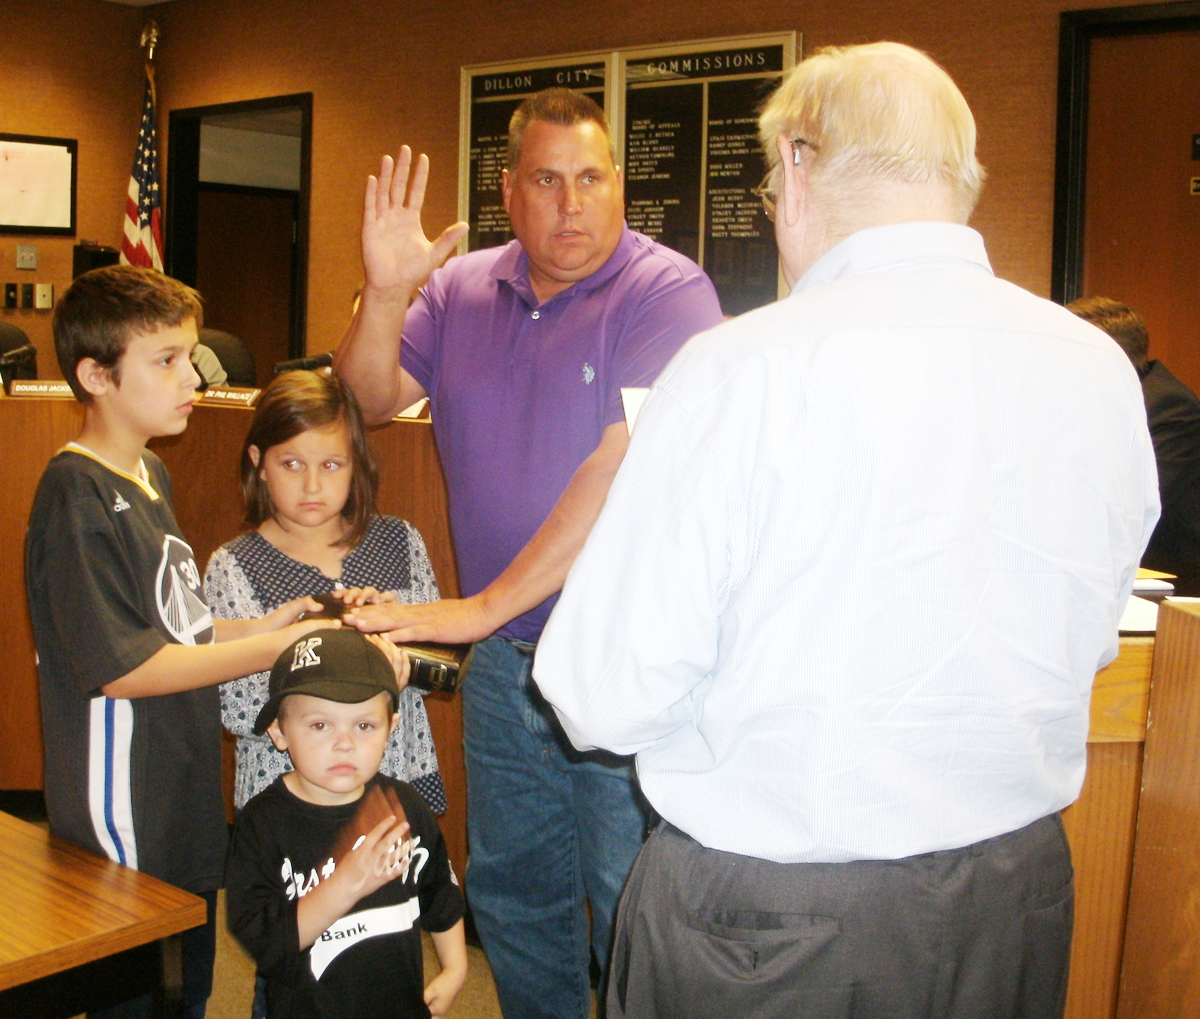 COUNCILMAN JOHNNY ELLER takes the oath of office as his children Ethan, Haidan, and Easton stand with him. The oath was administered by City Attorney Jack McInnis. (Photo by Betsy Finklea/The Dillon Herald